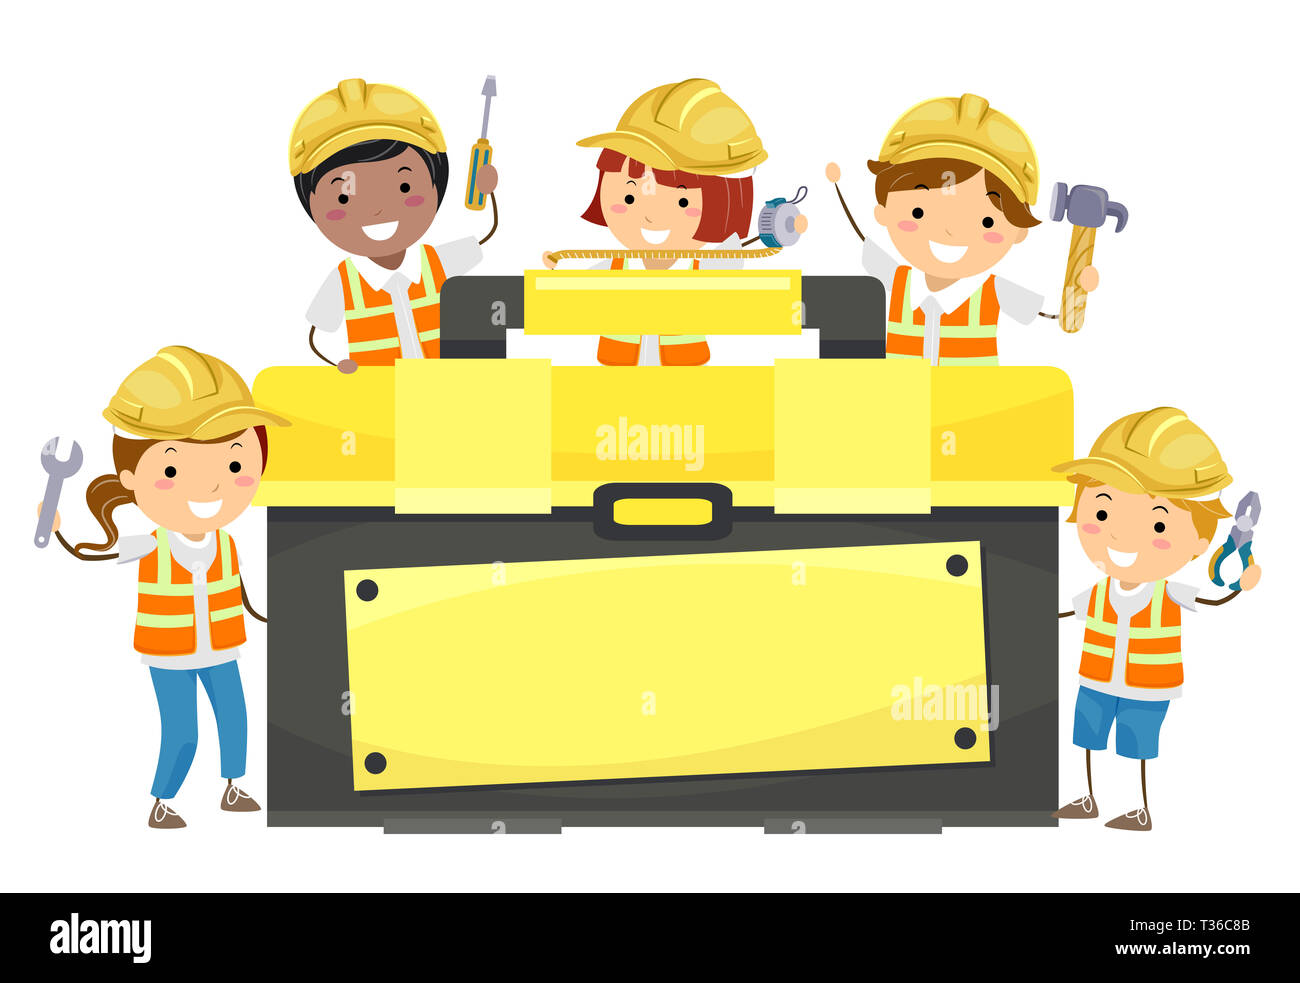 Illustration of Stickman Kids with Construction Tool Box Holding a Wrench,  Screw Driver, Tape Measure, Hammer and Pliers Stock Photo - Alamy